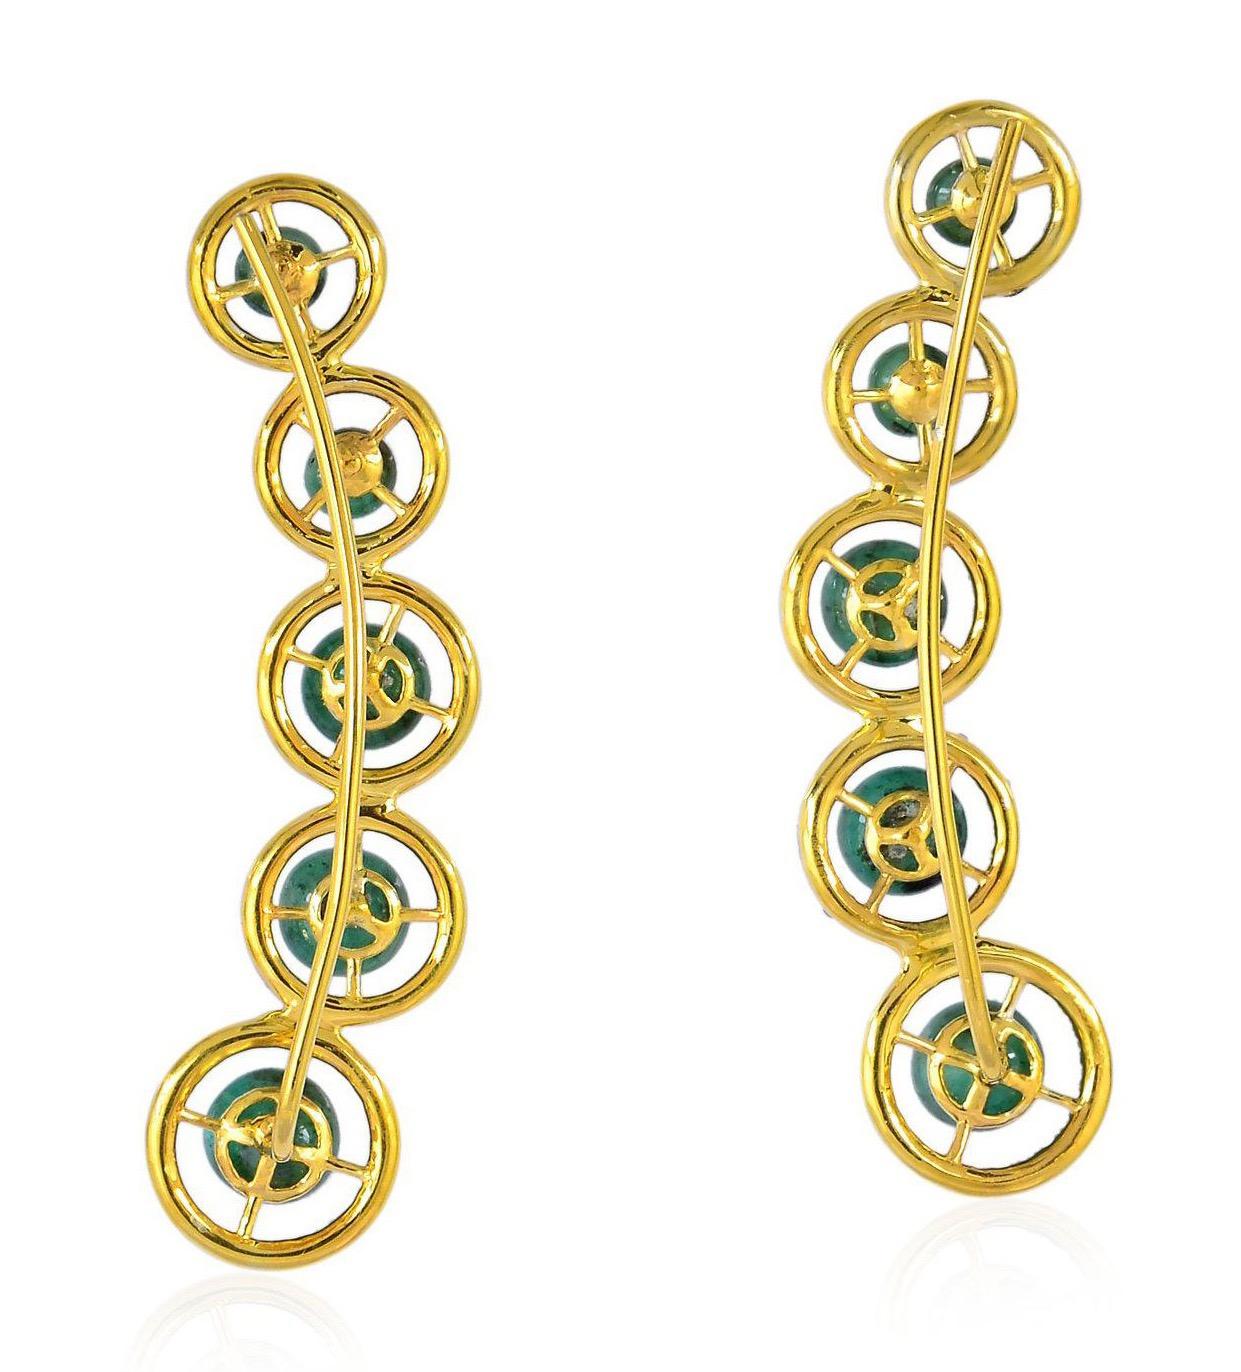 These stunning 4.5 carats emerald ear climbers are handmade in 18-karat gold and sterling silver. It's further enhanced with 1.22 carats of glimmering diamonds.

FOLLOW  MEGHNA JEWELS storefront to view the latest collection & exclusive pieces. 